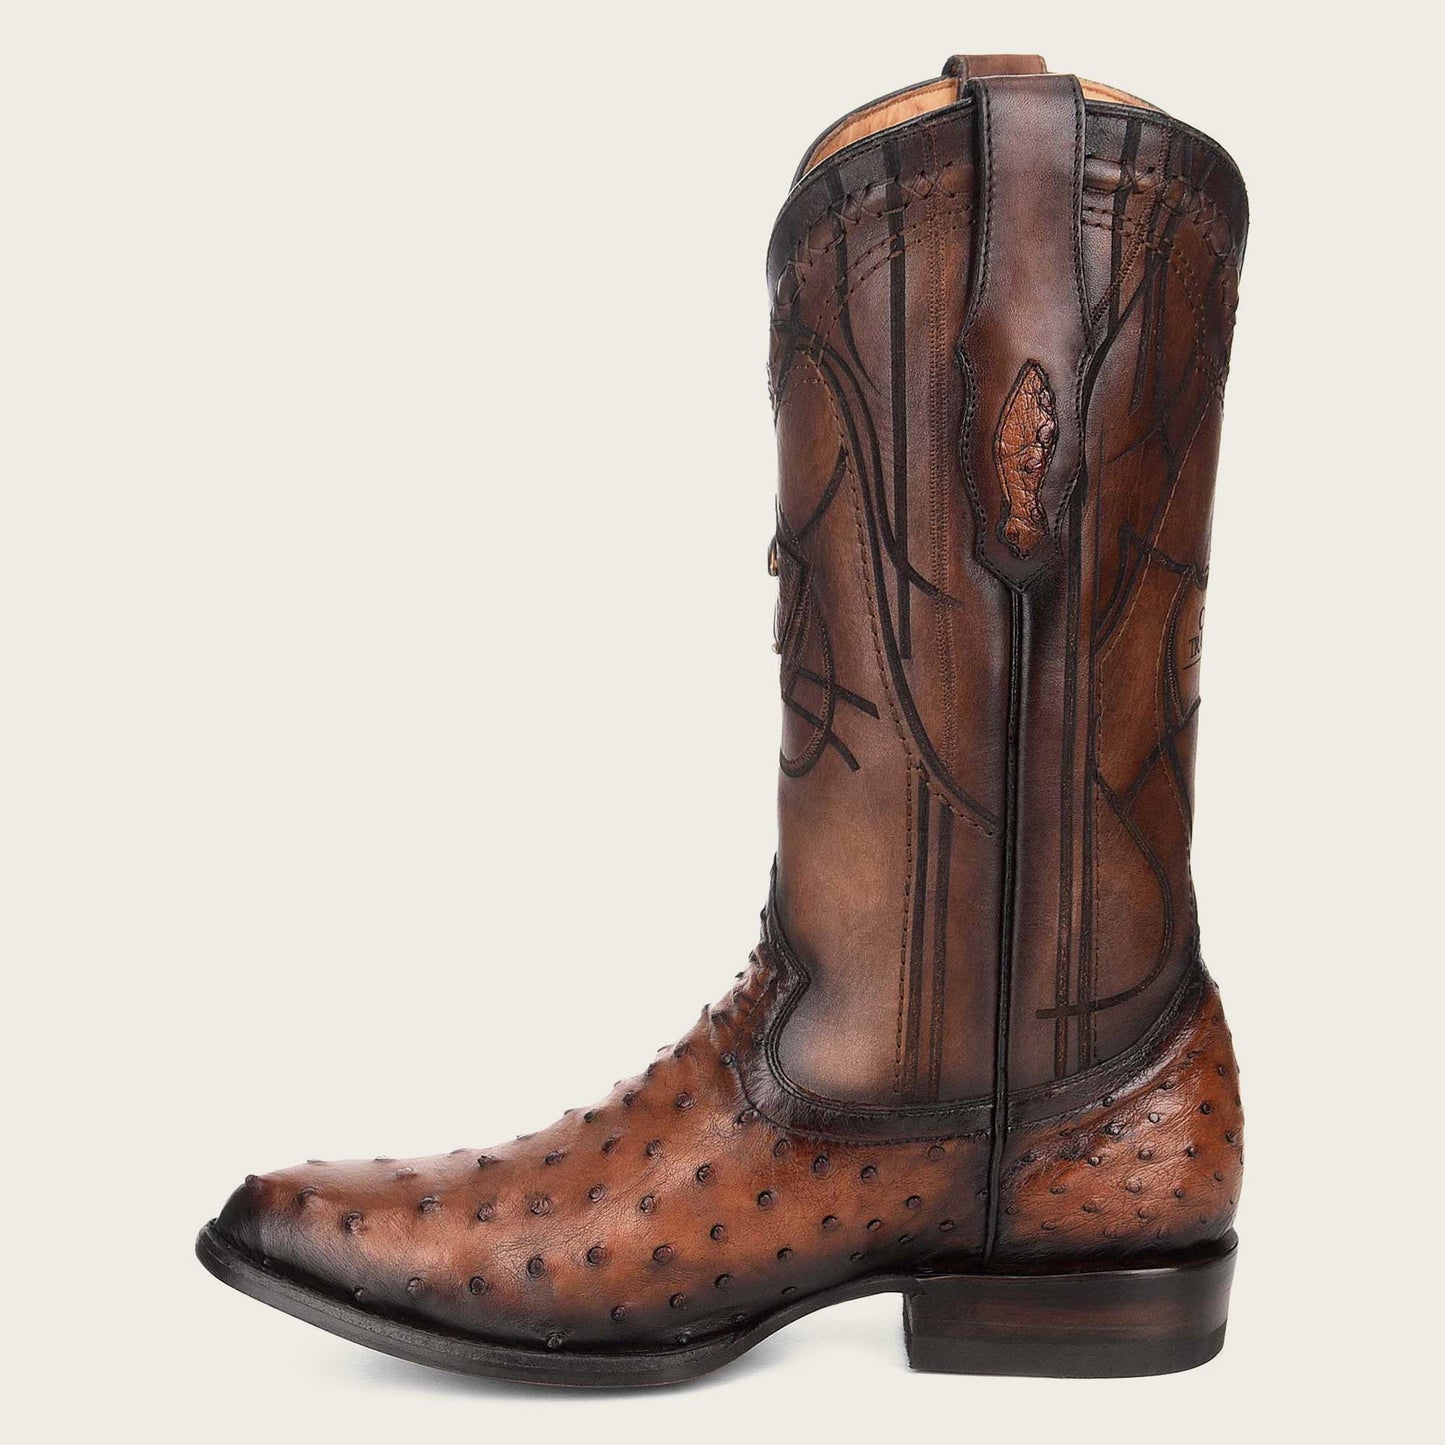 Stylish brown leather boot with intricate engraving and a timeless design.